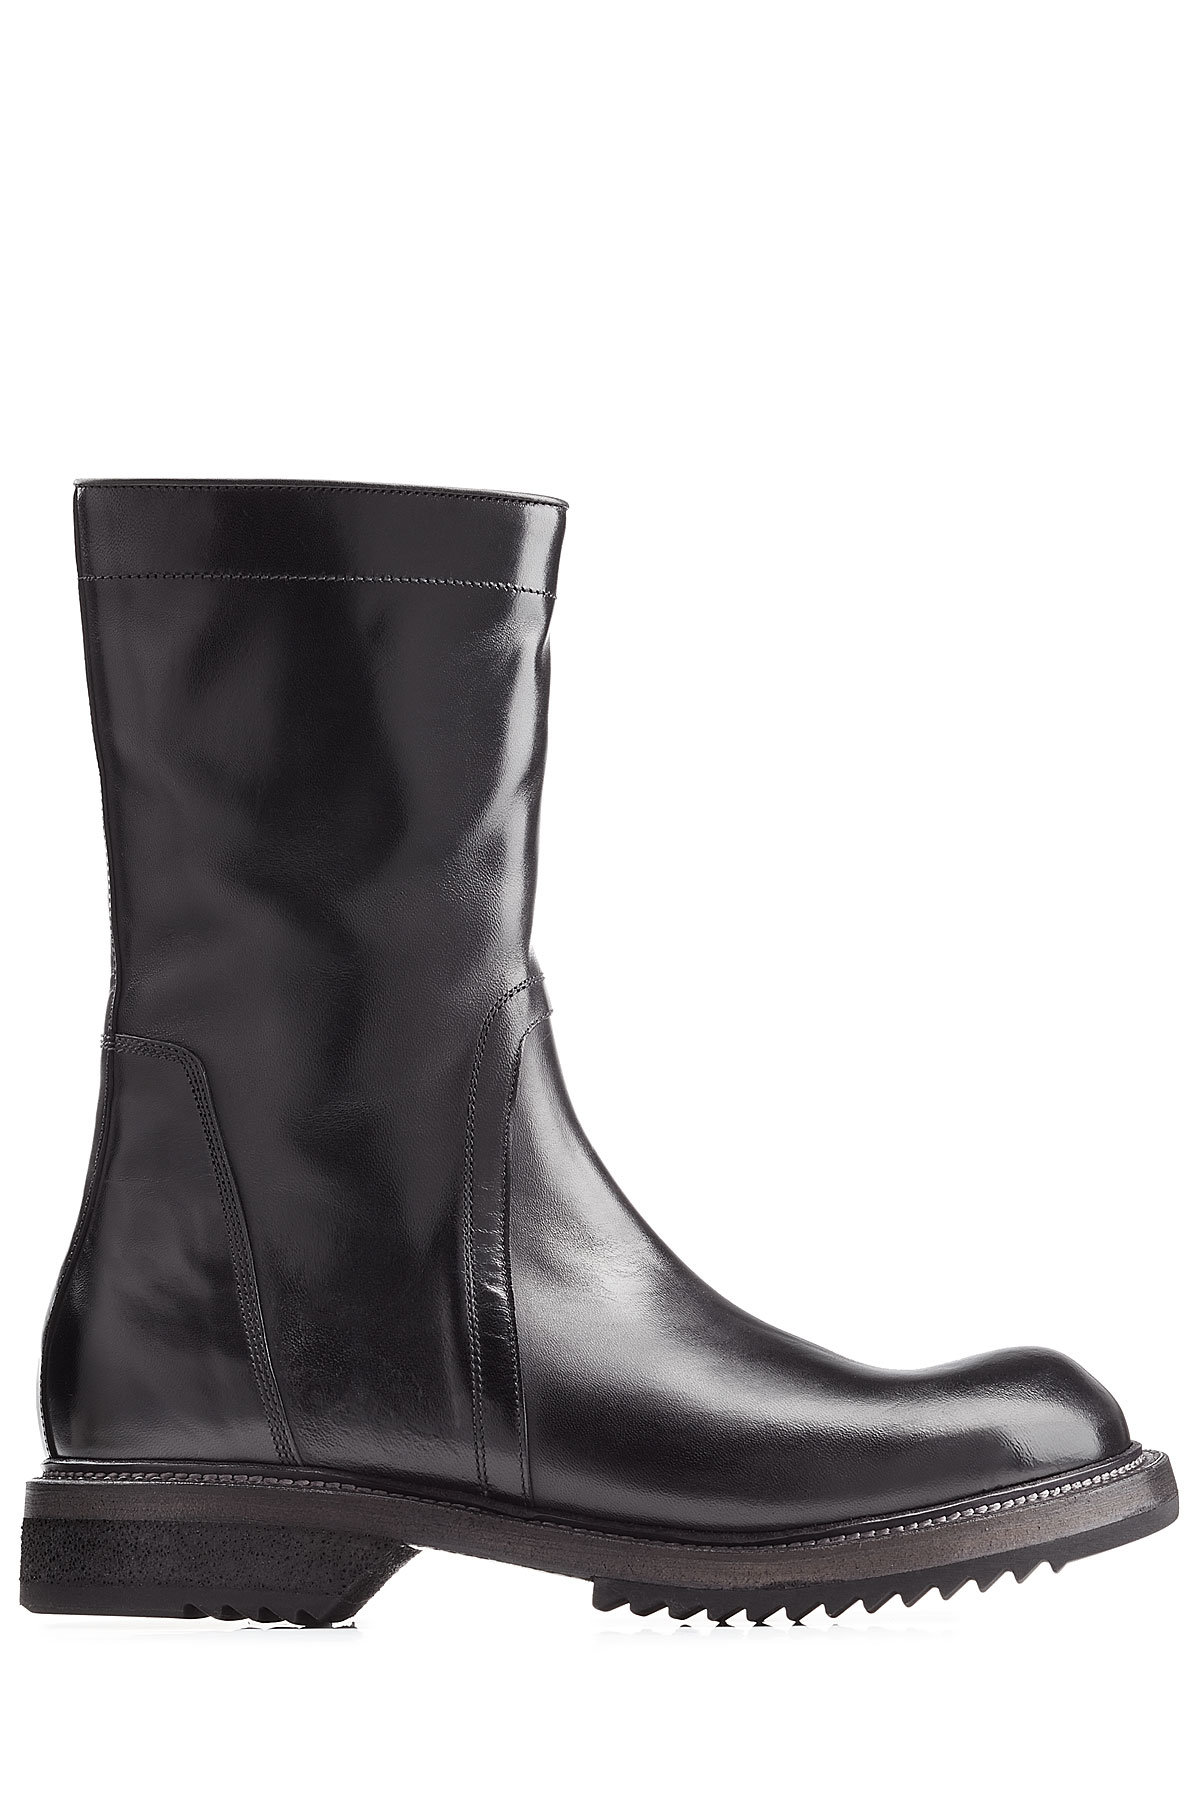 Rick owens Leather Boots in Black for Men | Lyst